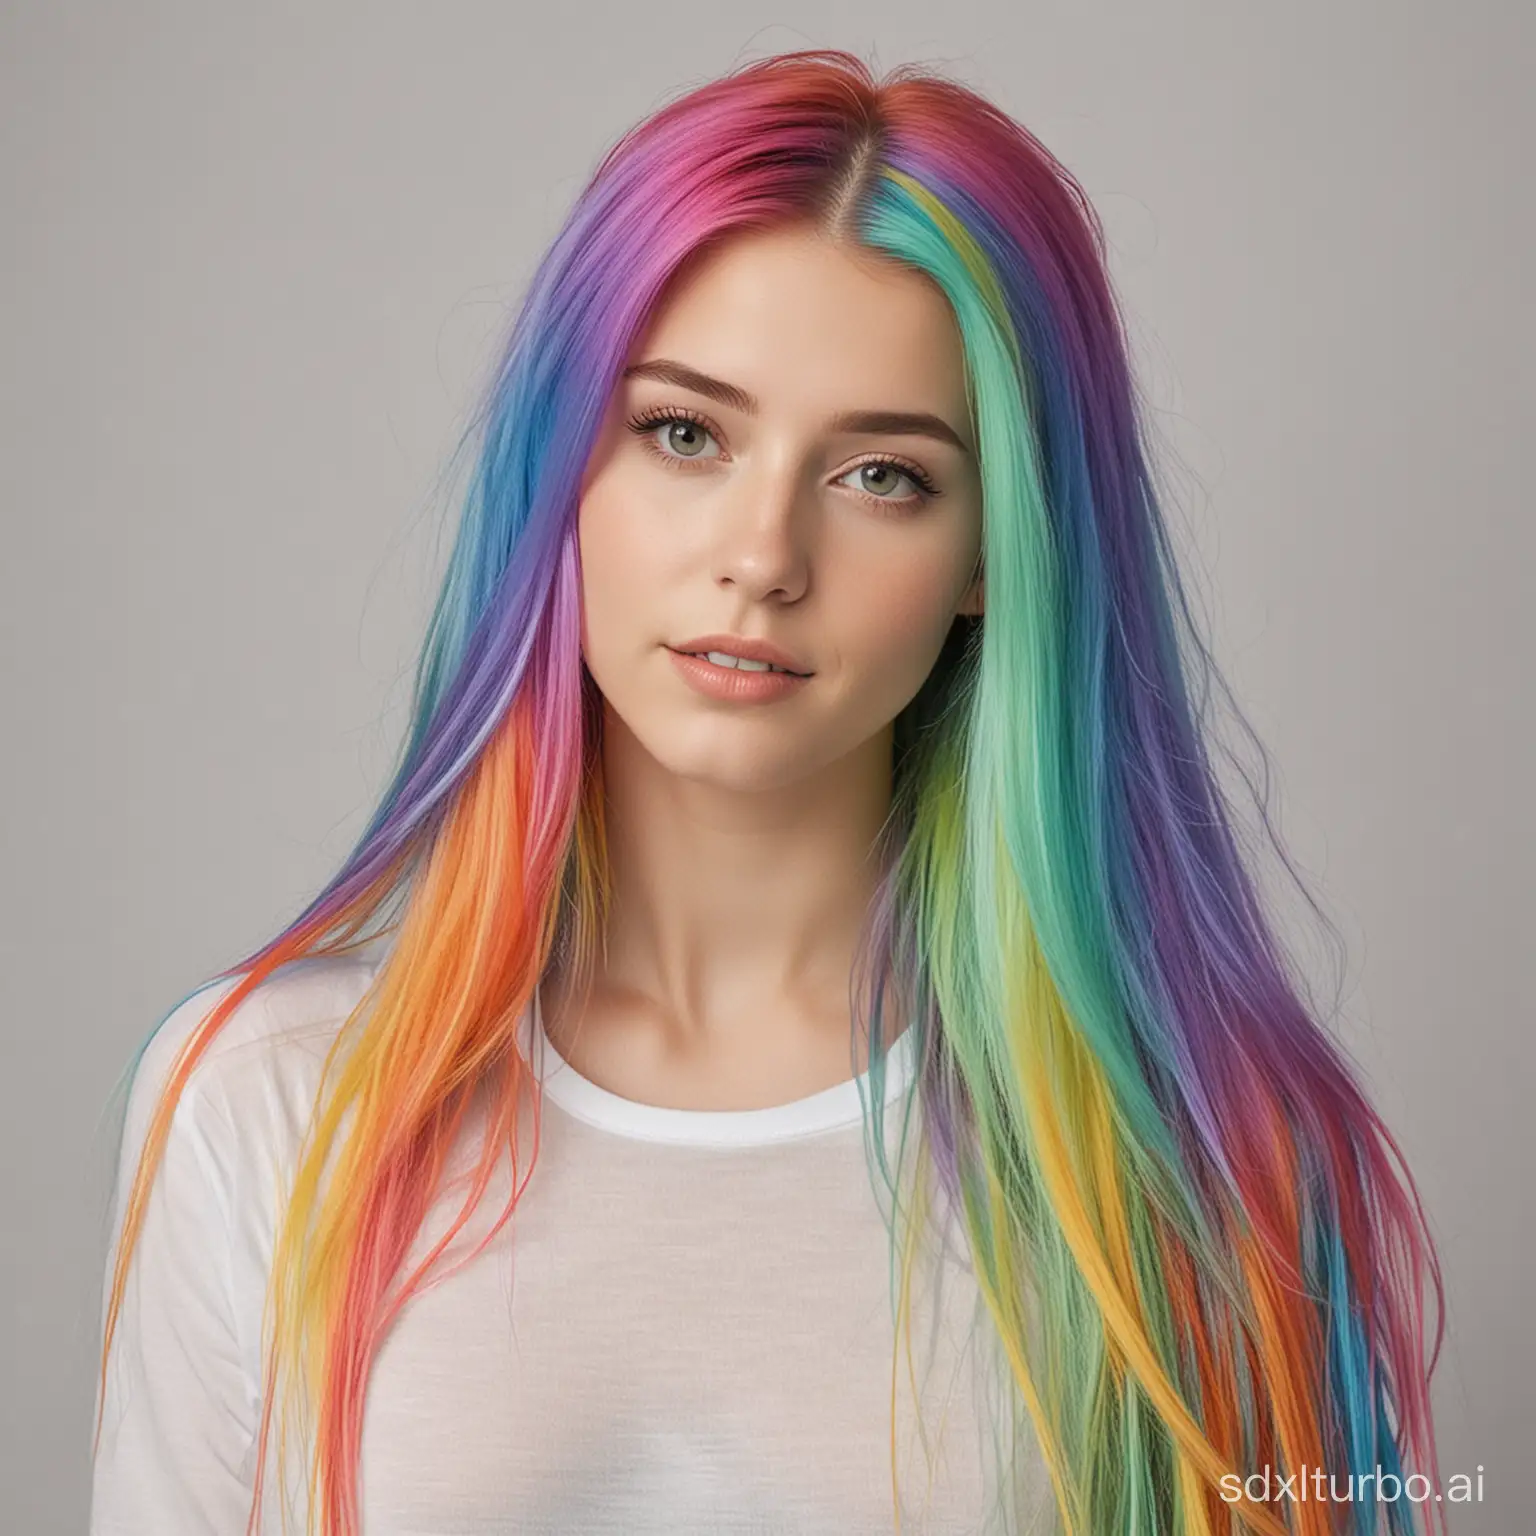 Colorful-LongHaired-Girl-with-RainbowColored-Hair